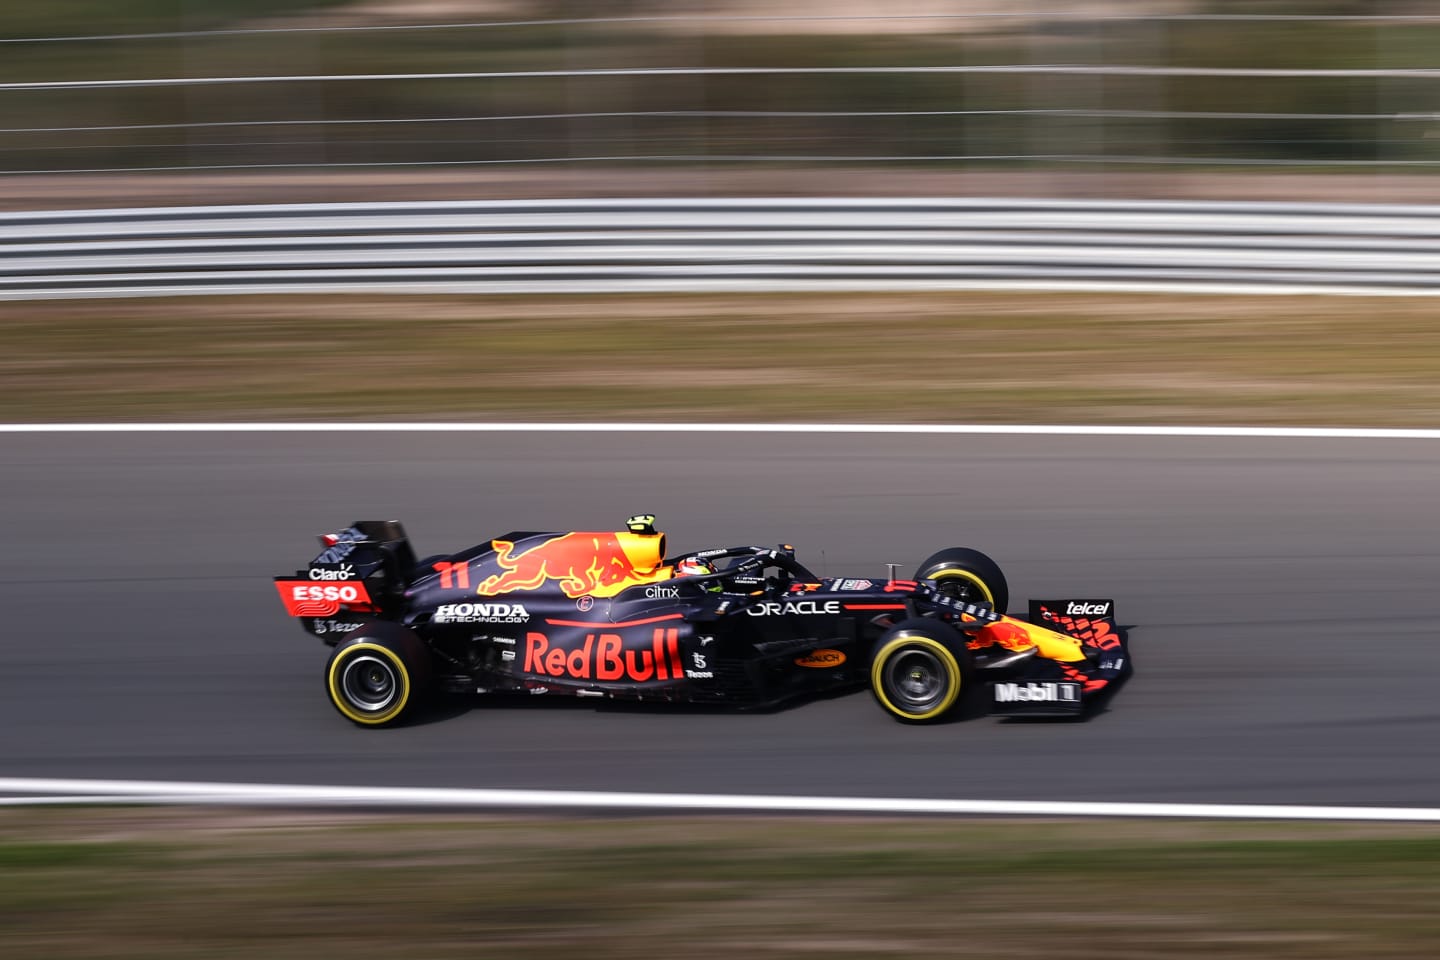 ZANDVOORT, NETHERLANDS - SEPTEMBER 03: Sergio Perez of Mexico driving the (11) Red Bull Racing RB16B Honda during practice ahead of the F1 Grand Prix of The Netherlands at Circuit Zandvoort on September 03, 2021 in Zandvoort, Netherlands. (Photo by Lars Baron/Getty Images)